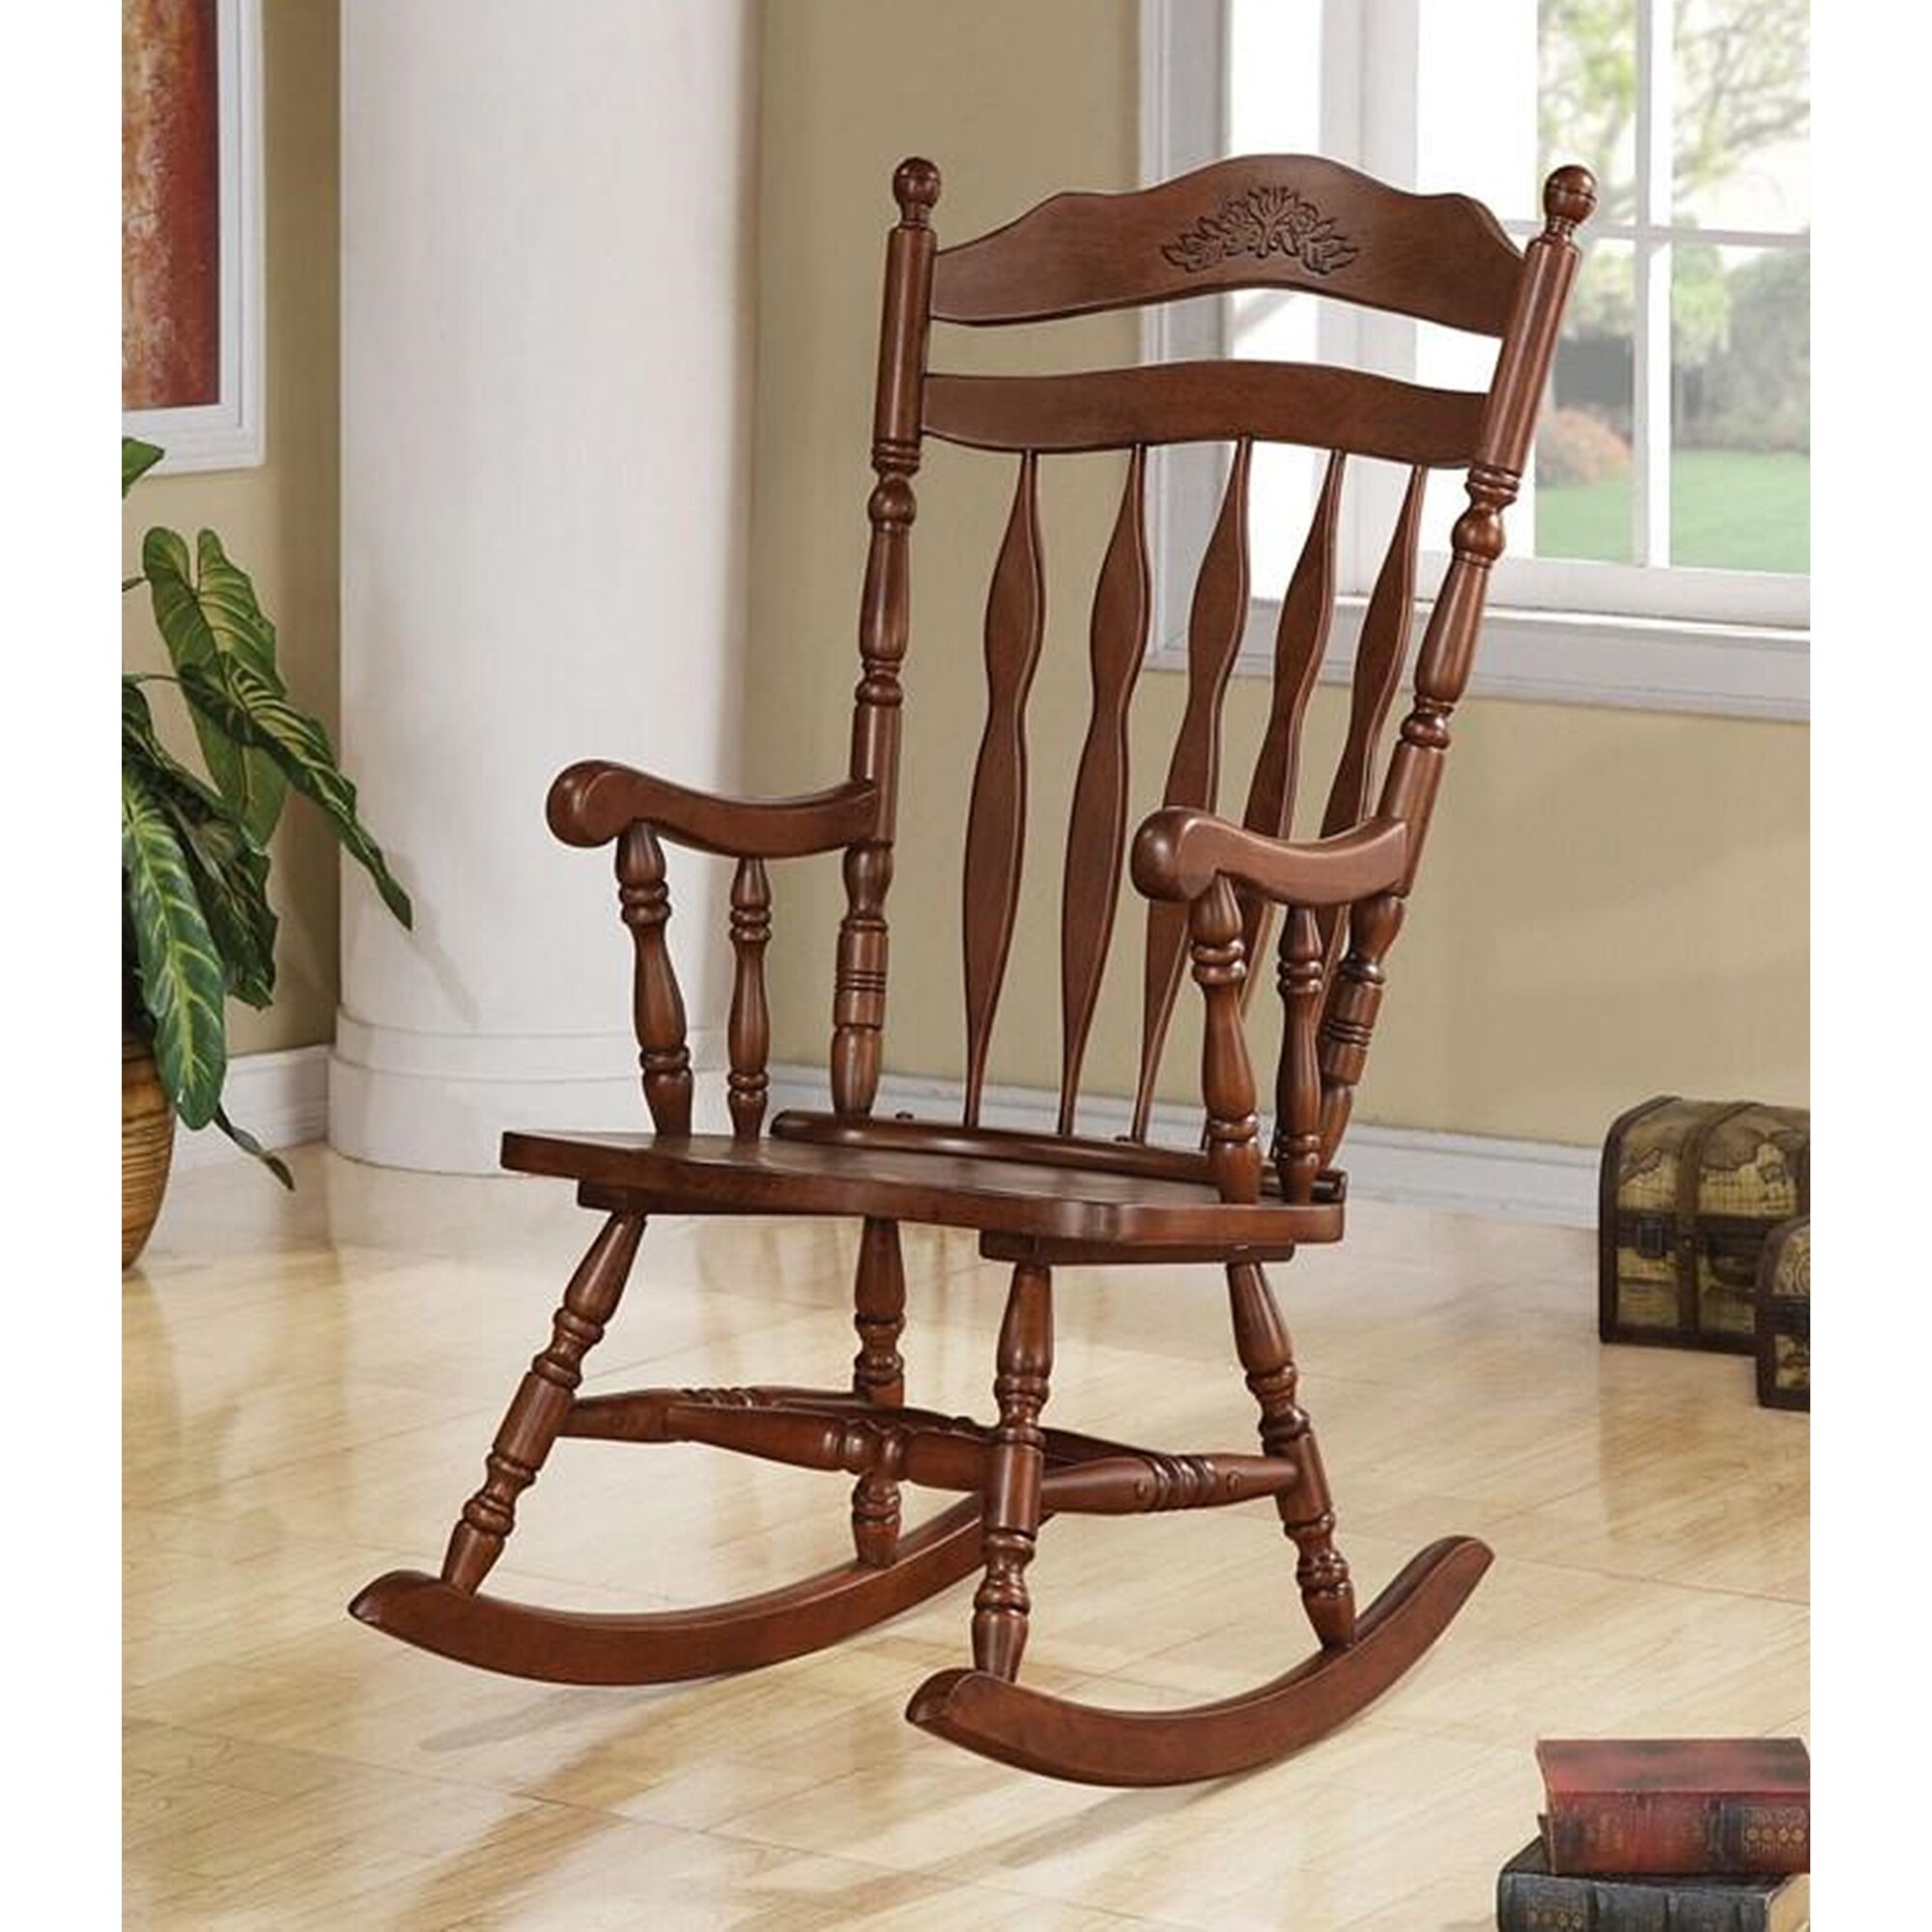 Colby Windsor Country Style Brown Wooden Rocking Chair